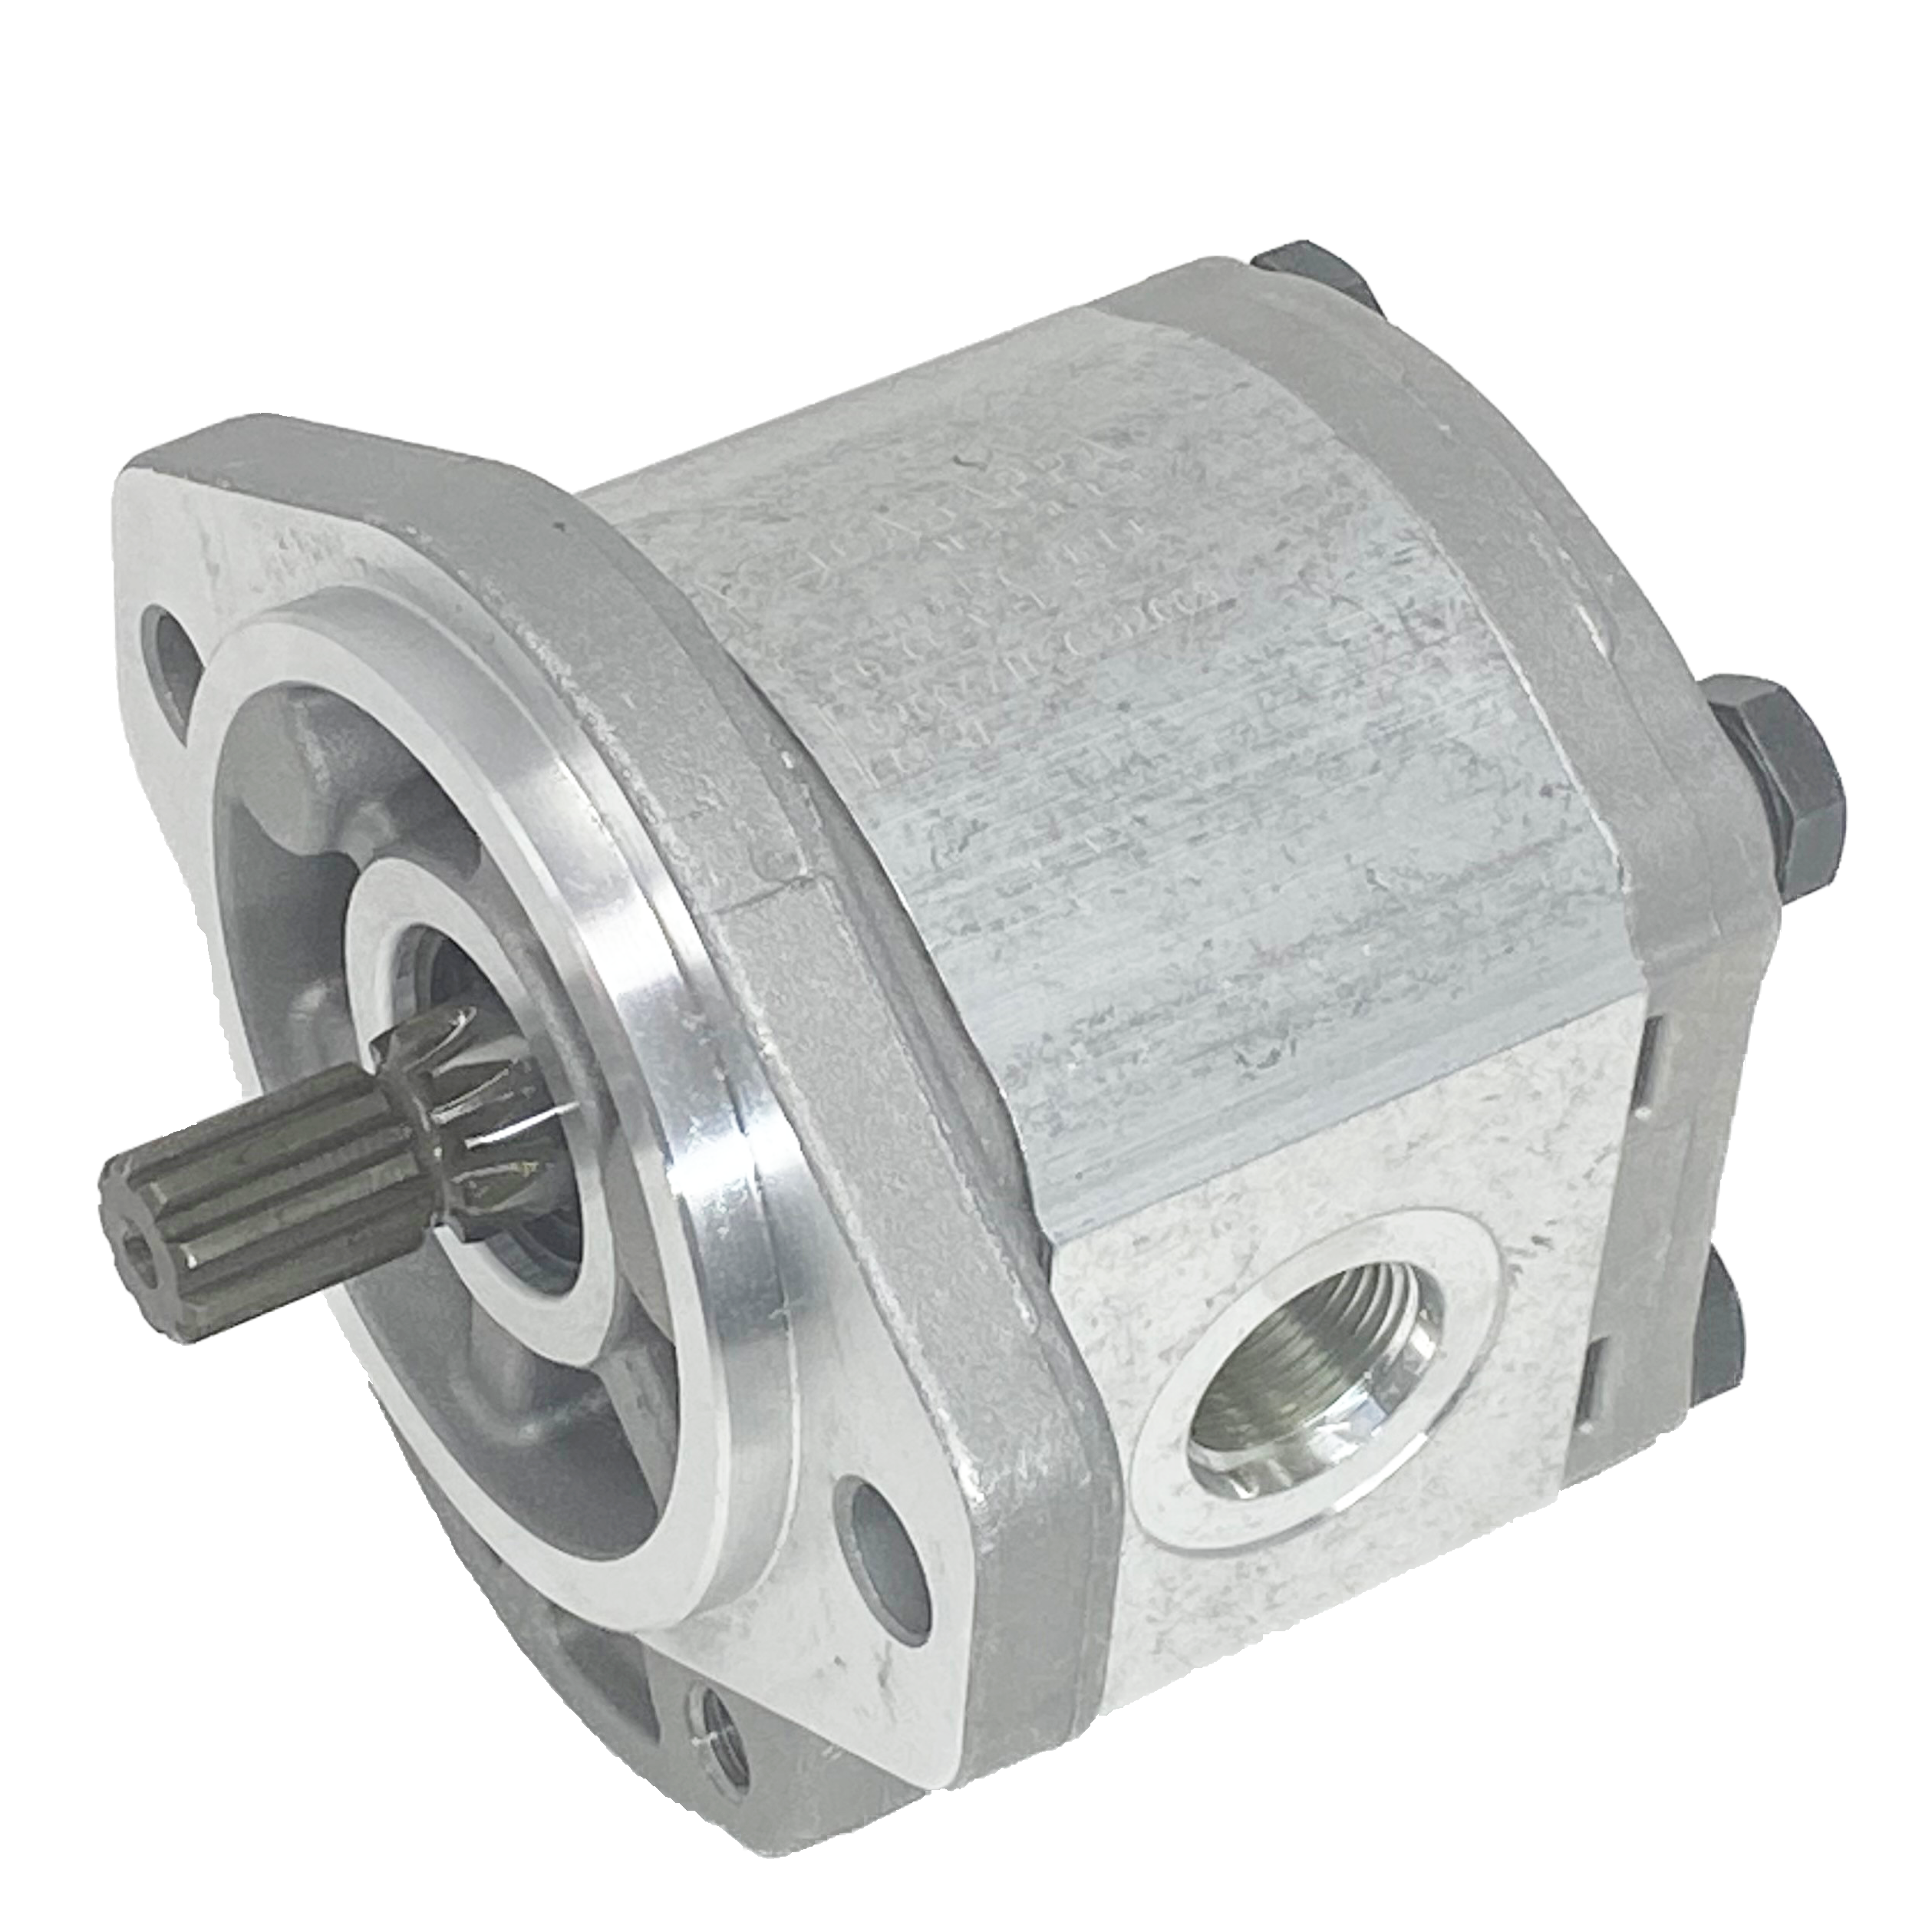 PLP20.14S0-31S1-LOF/OC-S7-N-EL-FS : Casappa Polaris Gear Pump, 14.53cc, 3625psi Rated, 3500RPM, CCW, 5/8" Keyed Shaft, SAE A 2-Bolt Flange, 1" #16 SAE Inlet, 0.625 (5/8") #10 SAE Outlet, Aluminum Body & Flange